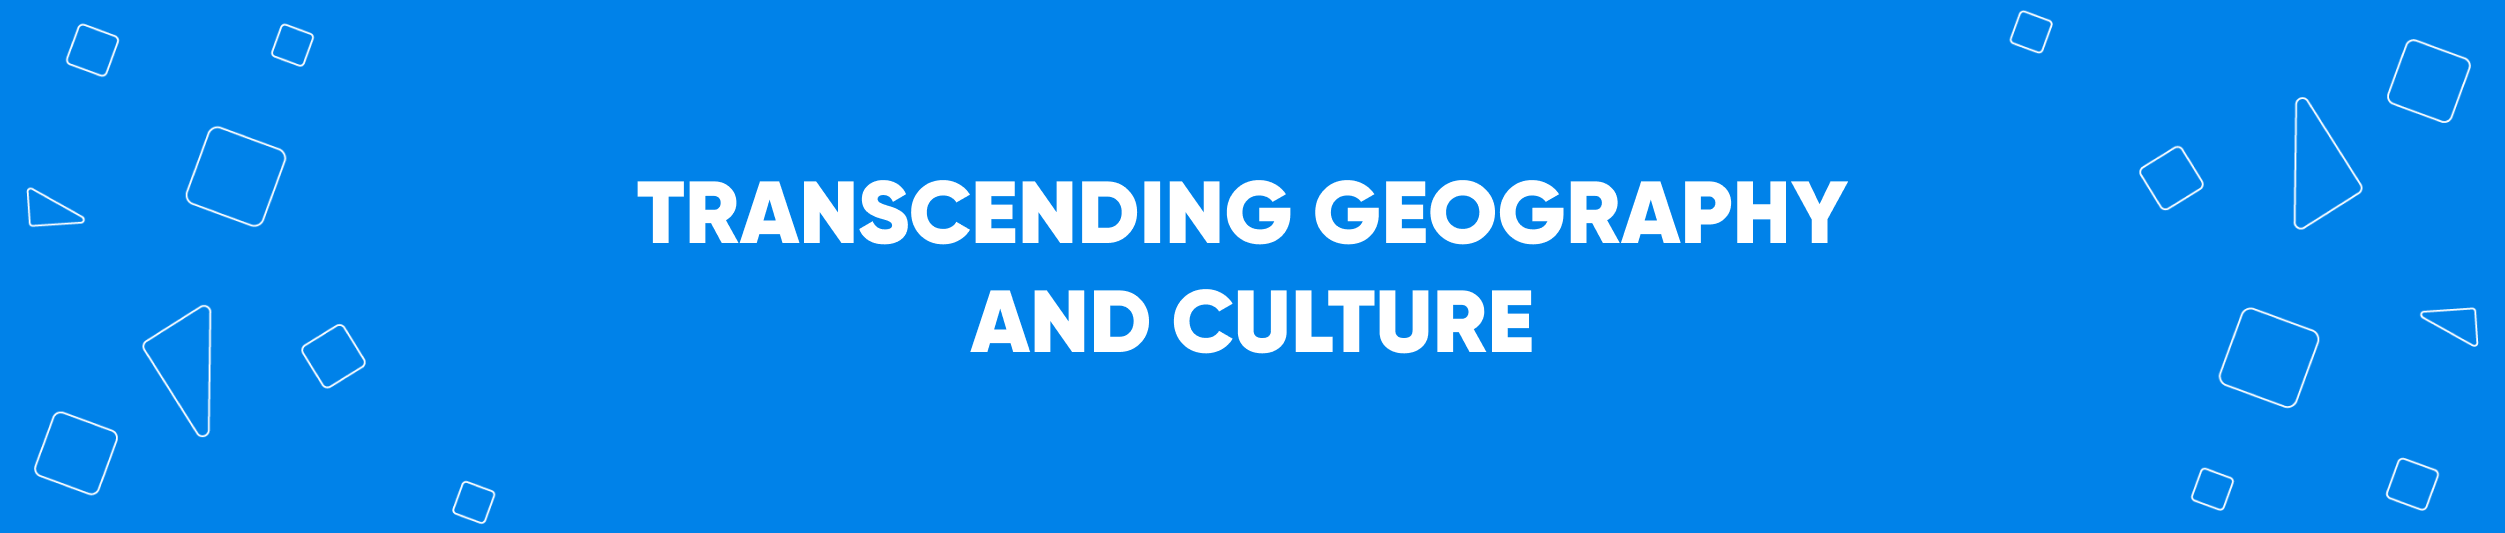 Transcending Geography and Culture